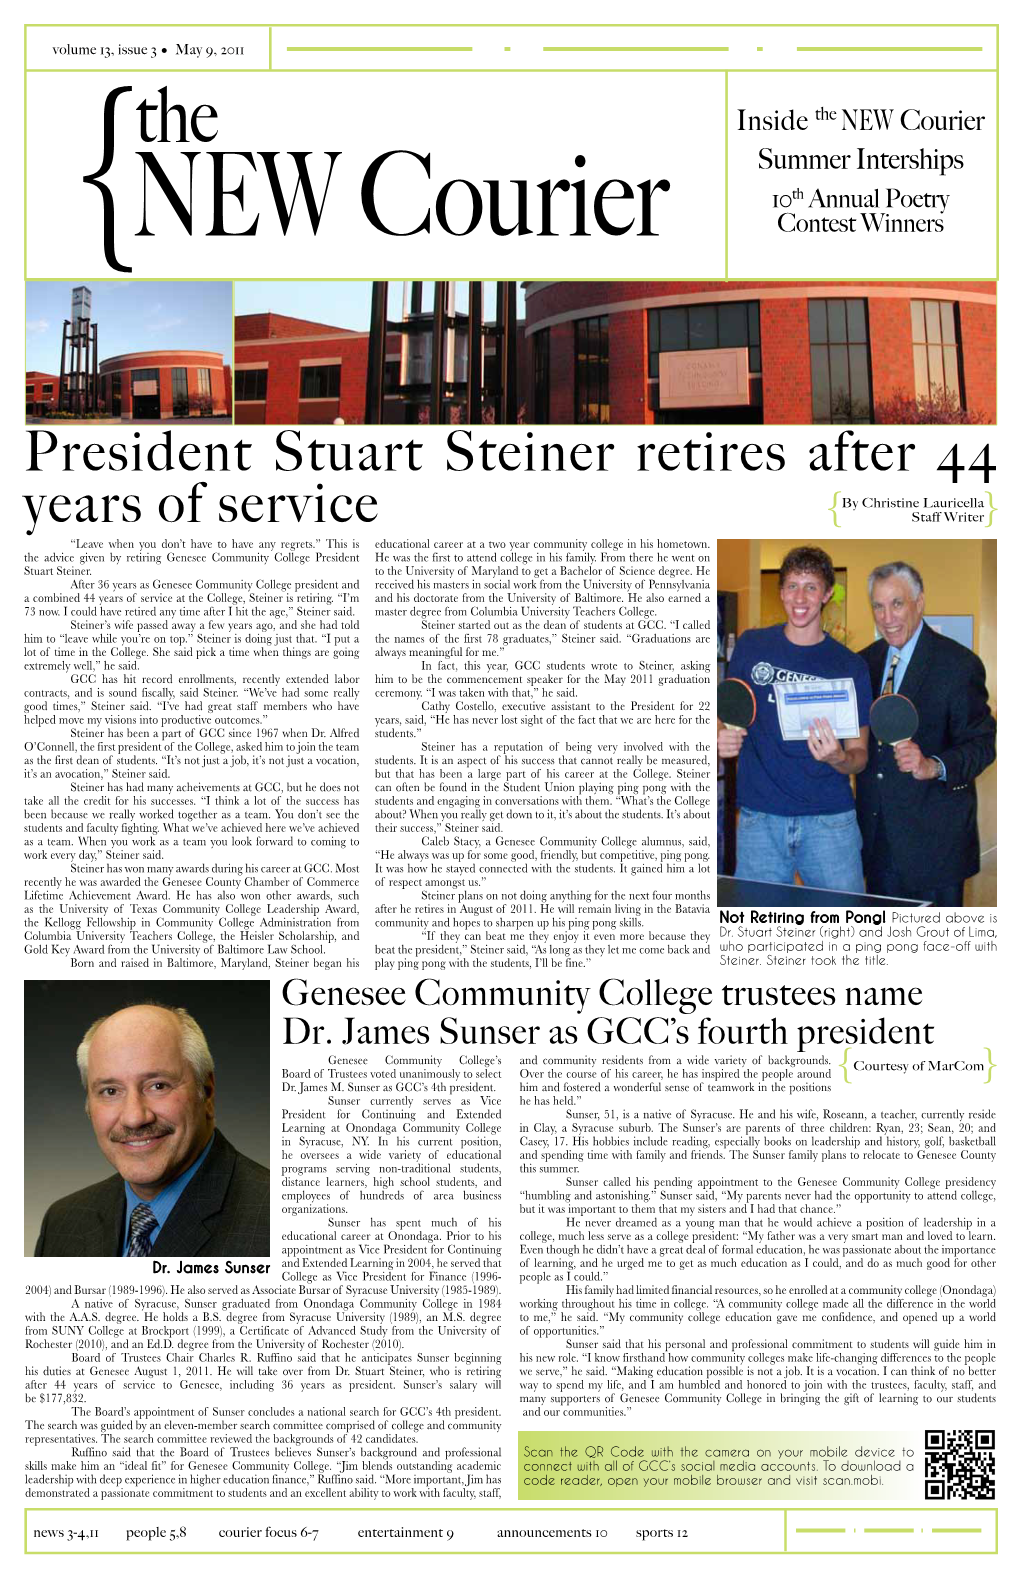 President Stuart Steiner Retires After 44 Years of Service